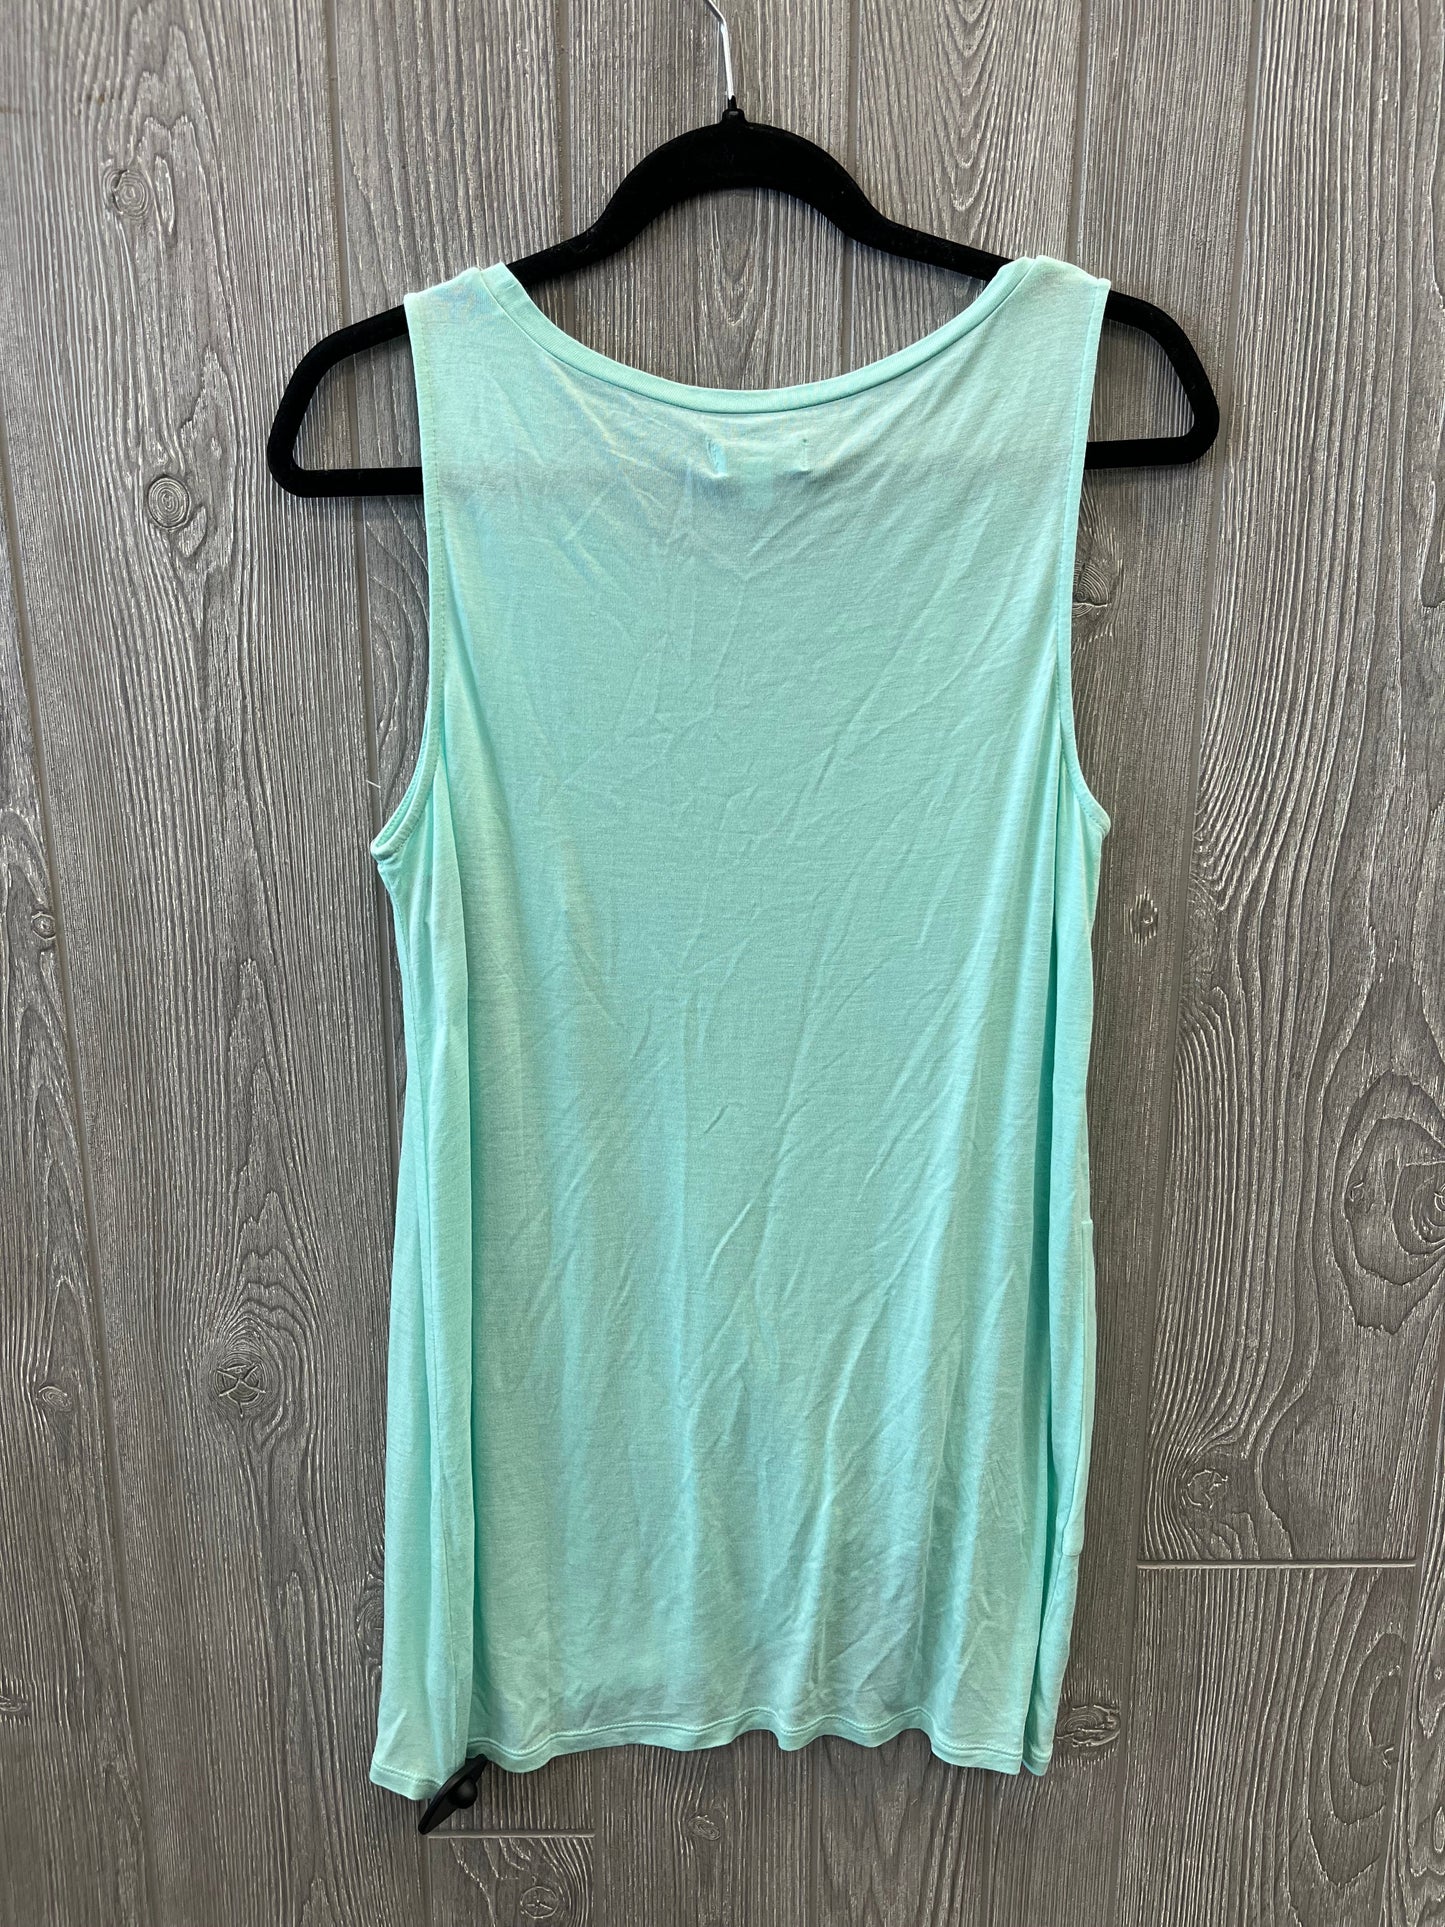 Top Sleeveless By Charming Charlie  Size: M